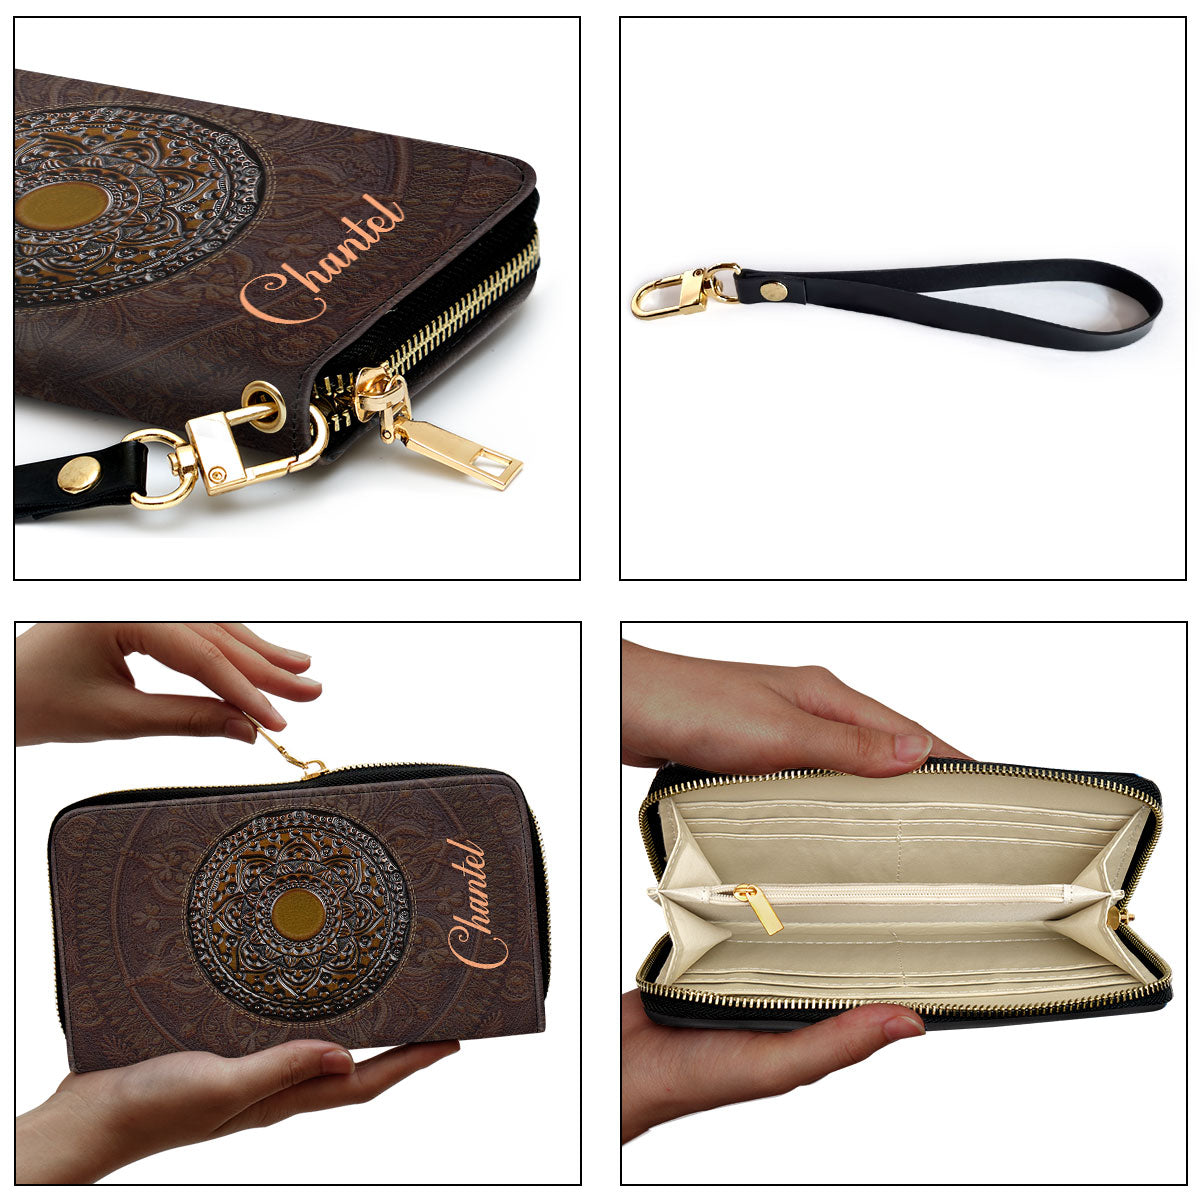 The Mysticism - Personalized Leather Clutch Purse STB25